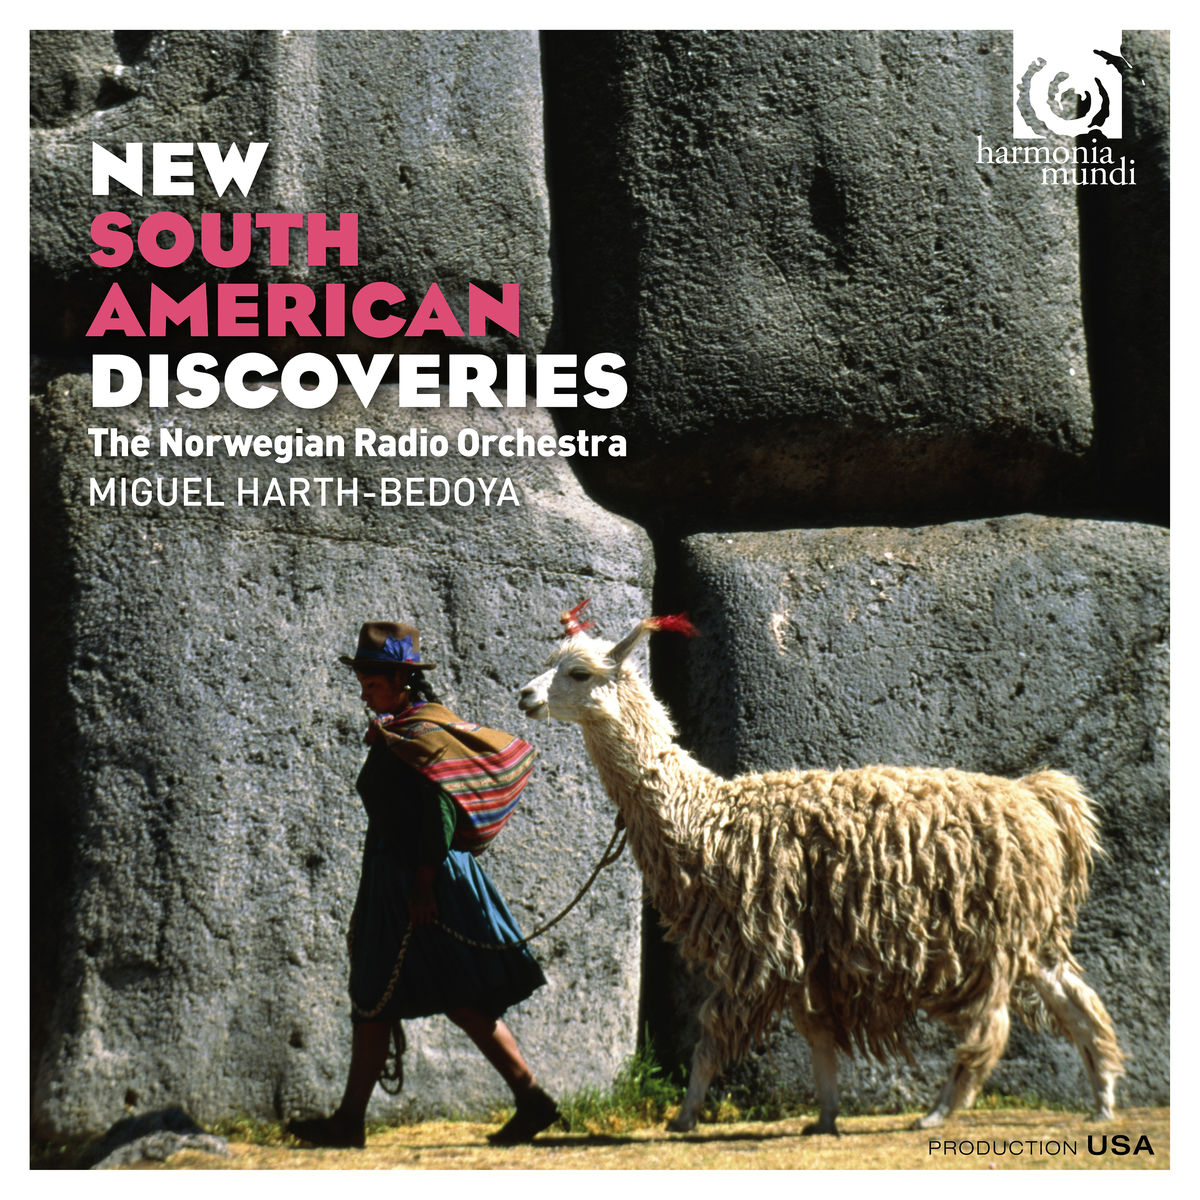 Miguel Harth-Bedoya & The Norwegian Radio Orchestra – New South American Discoveries (2016) [Qobuz FLAC 24bit/48kHz]